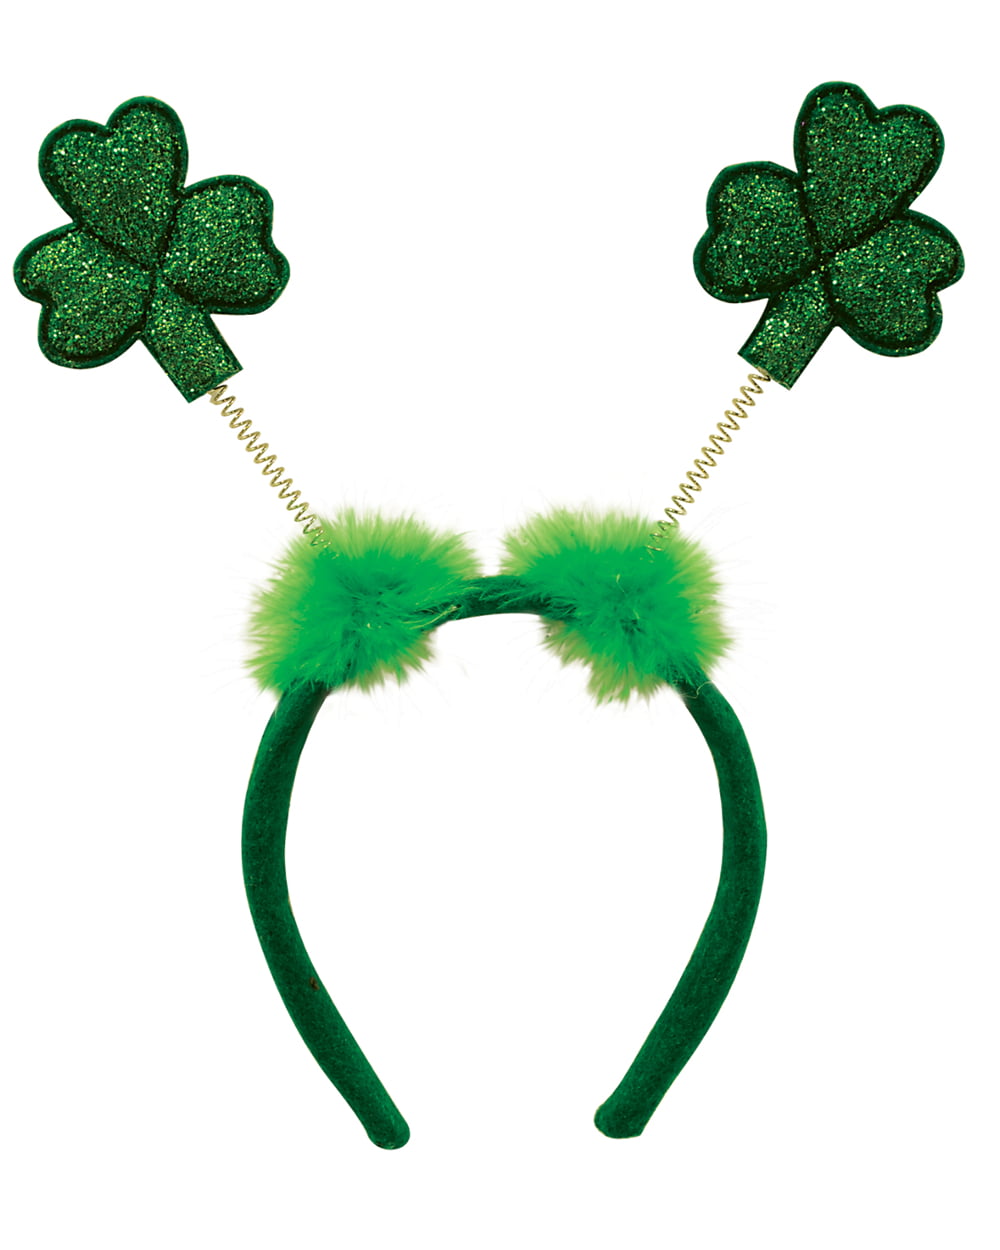 Chuangdi 6 Pieces St 3 Styles Patricks Day Headbands Shamrock Headboppers Costume Headbands for Irish Party Accessories